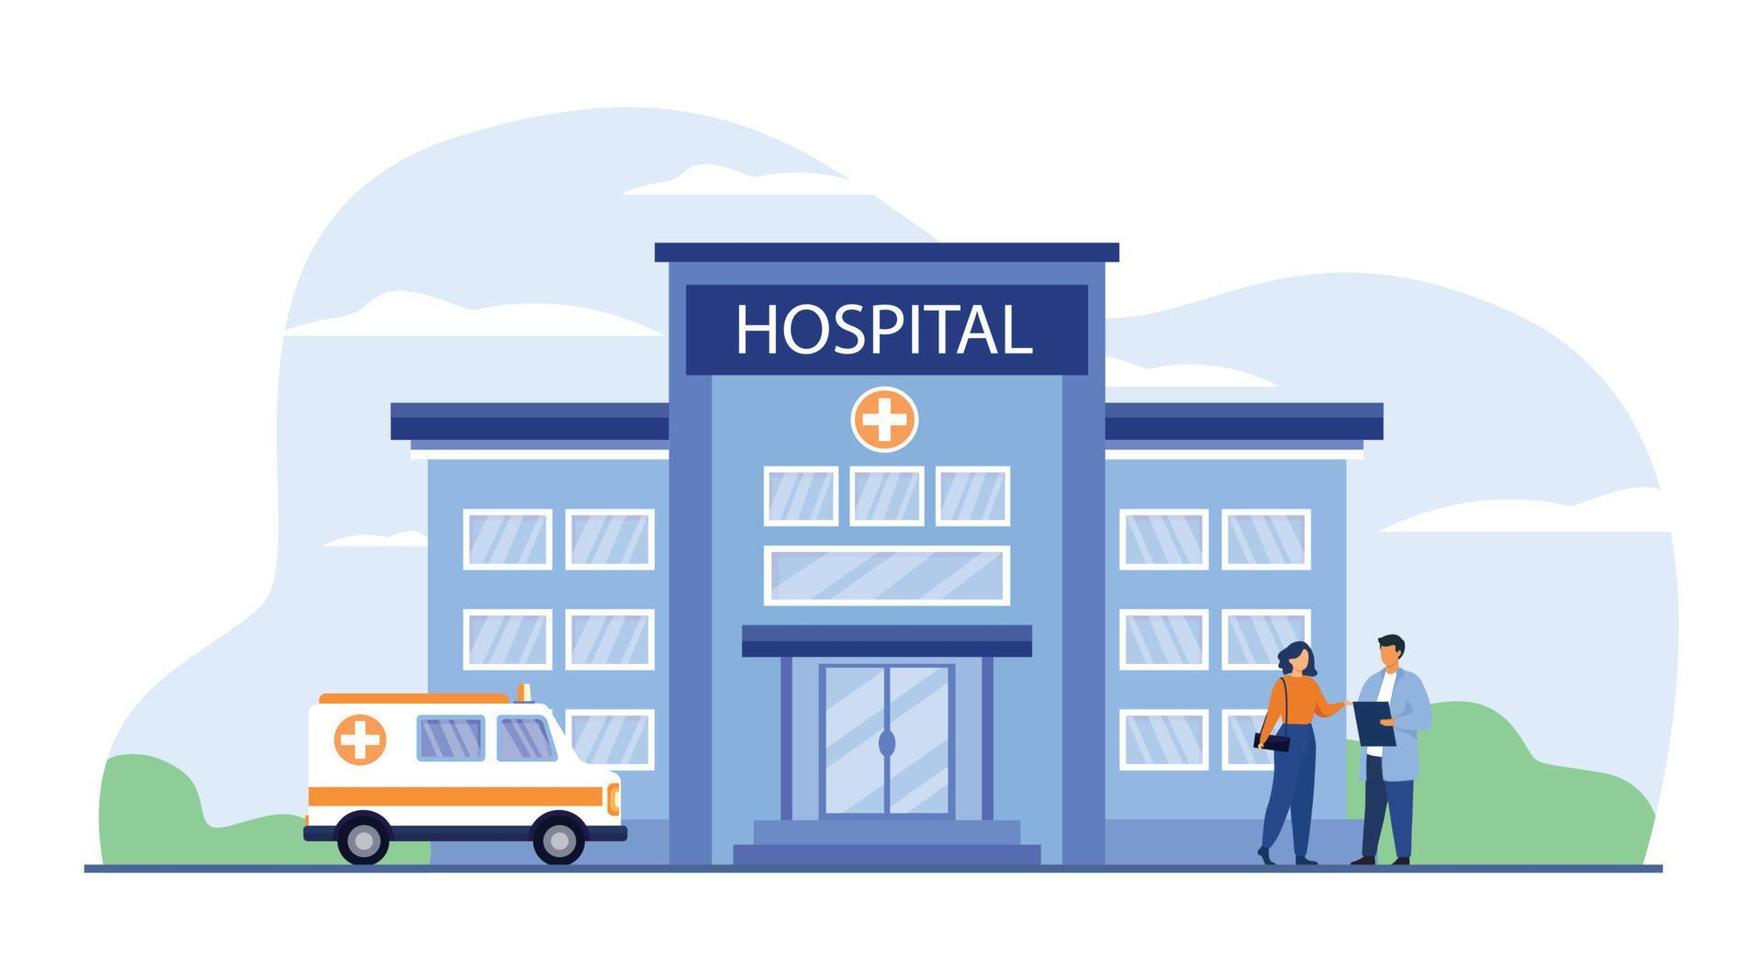 Medical care and health center concept. City hospital building with ambulance car in flat design. Patient talking to doctor at entrance, ambulance car parked at hospital. vector